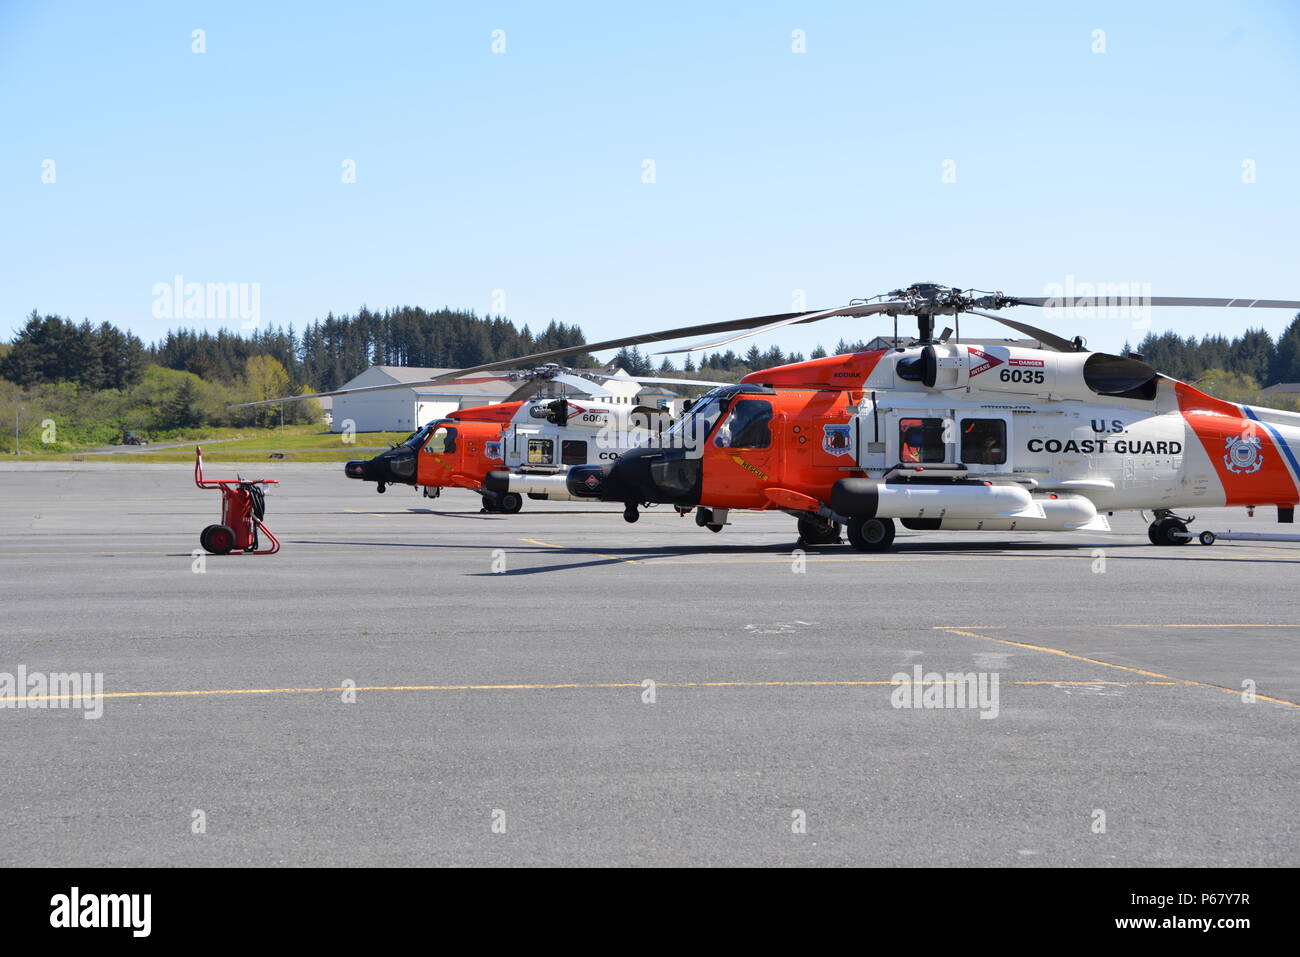 A pair of Coast Guard MH-60 Jayhawk helicopters sit on the flight line at Air Station Kodiak, Alaska on May 13, 2016. Stock Photo